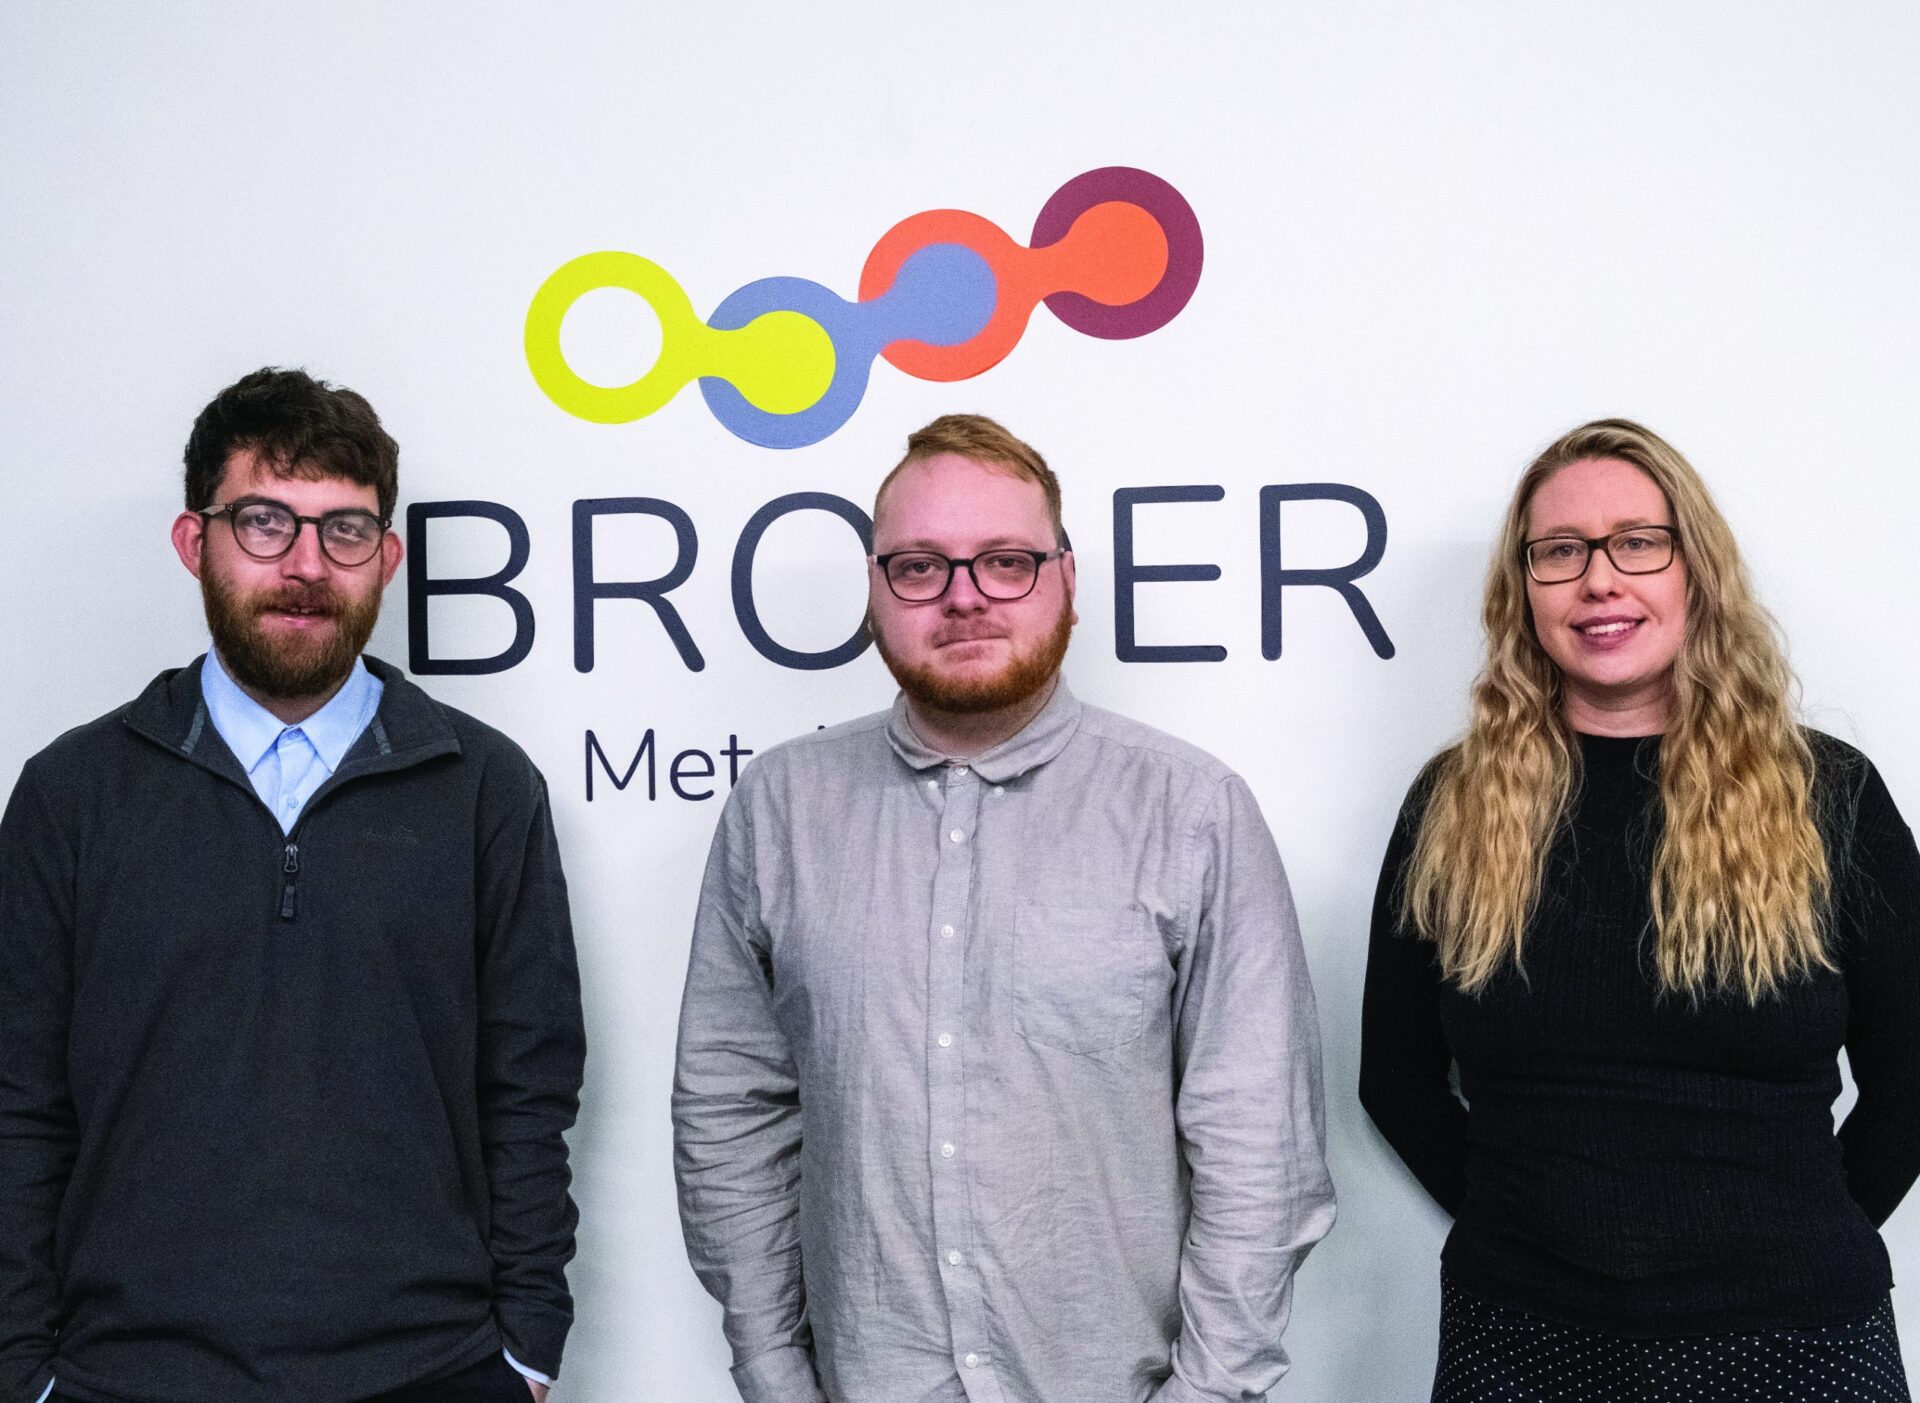 Broder Metals Group Ltd Introduces New Trio to Bolster Team and Expand Services